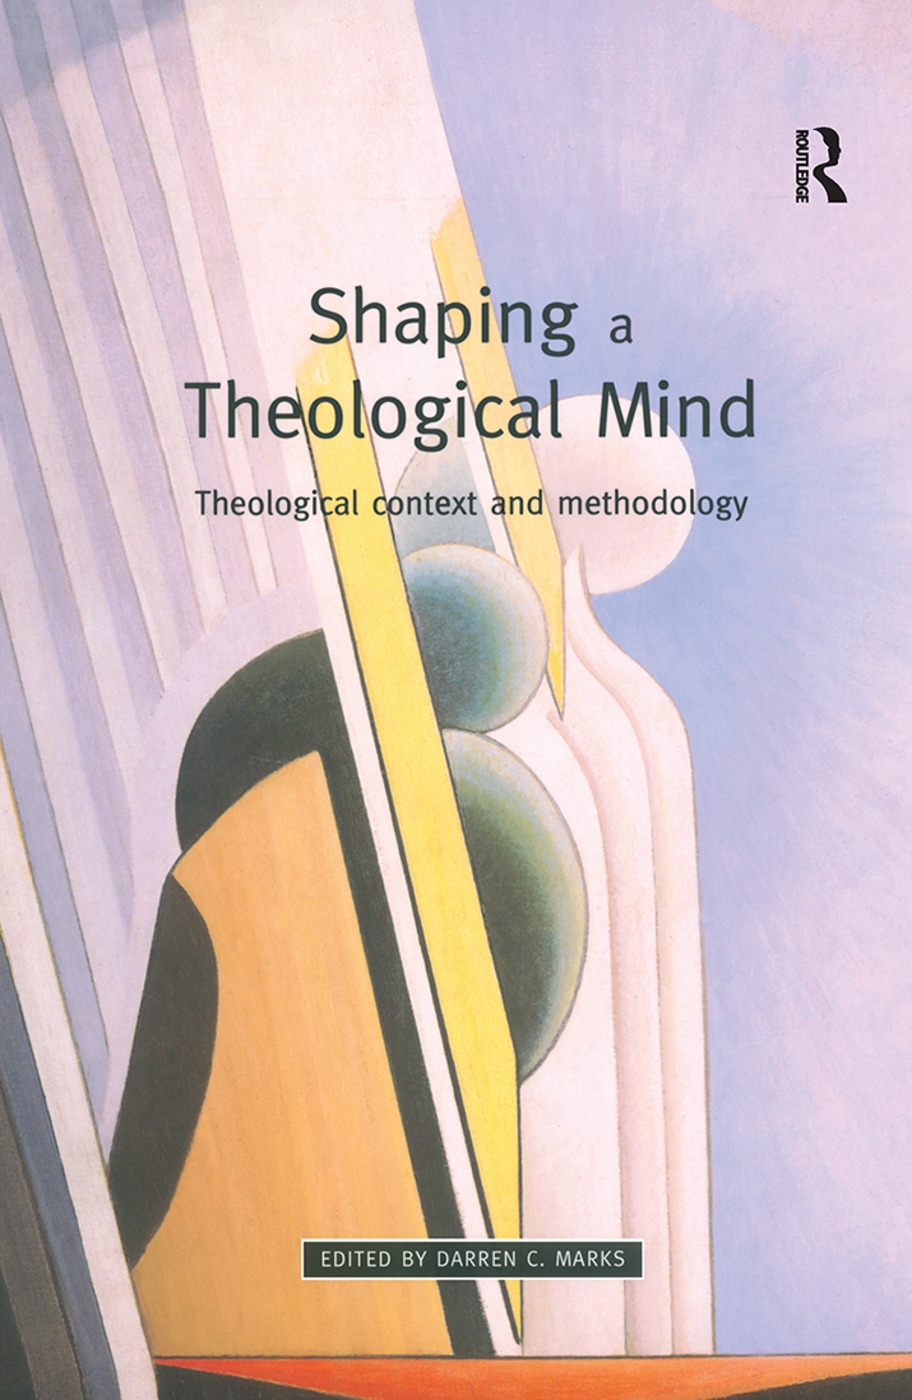 Shaping a Theological Mind: Theological Context and Methodology